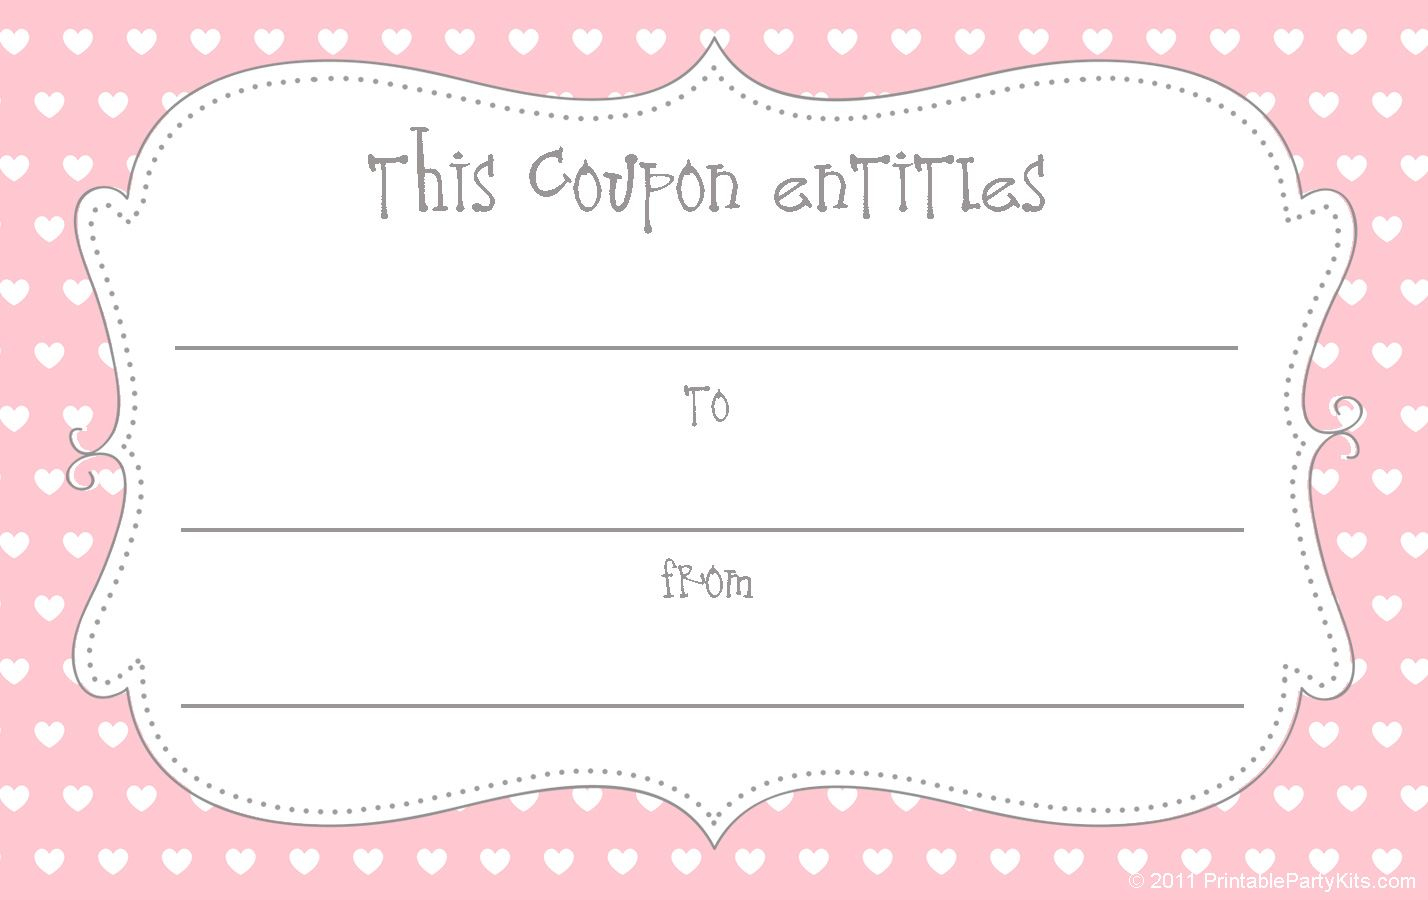 Early Play Templates: Free Gift Coupon Templates To Print Out - Free Printable Gift Coupons